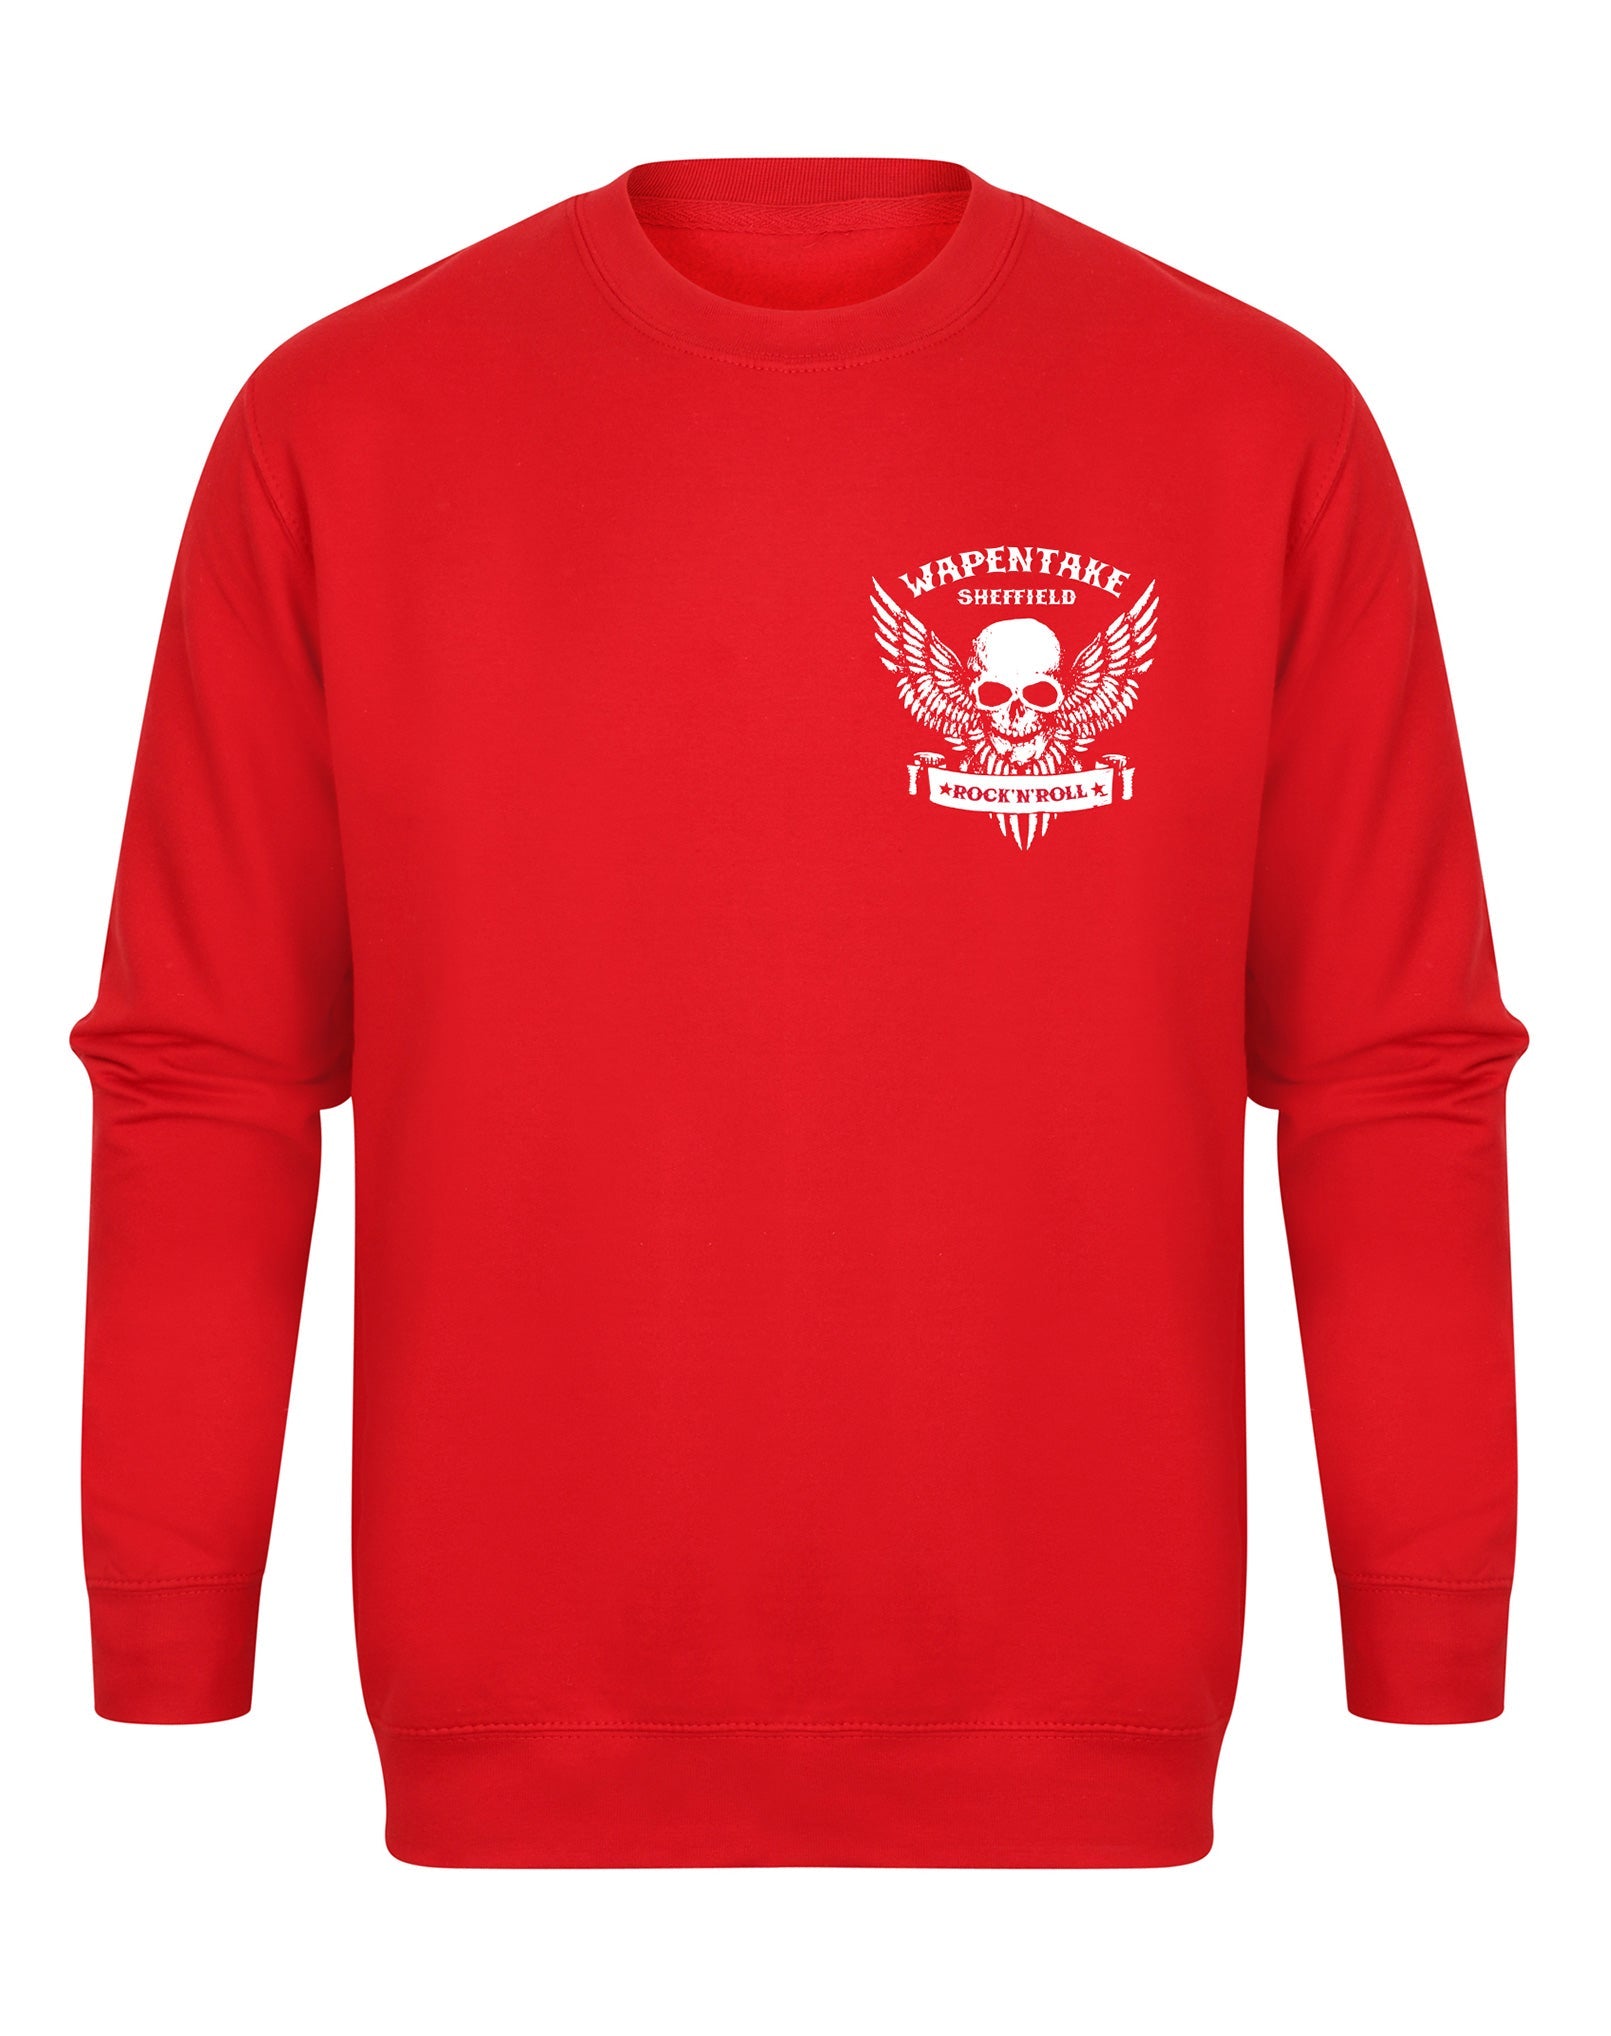 Wapentake small skull/wings unisex fit sweatshirt - various colours - Dirty Stop Outs